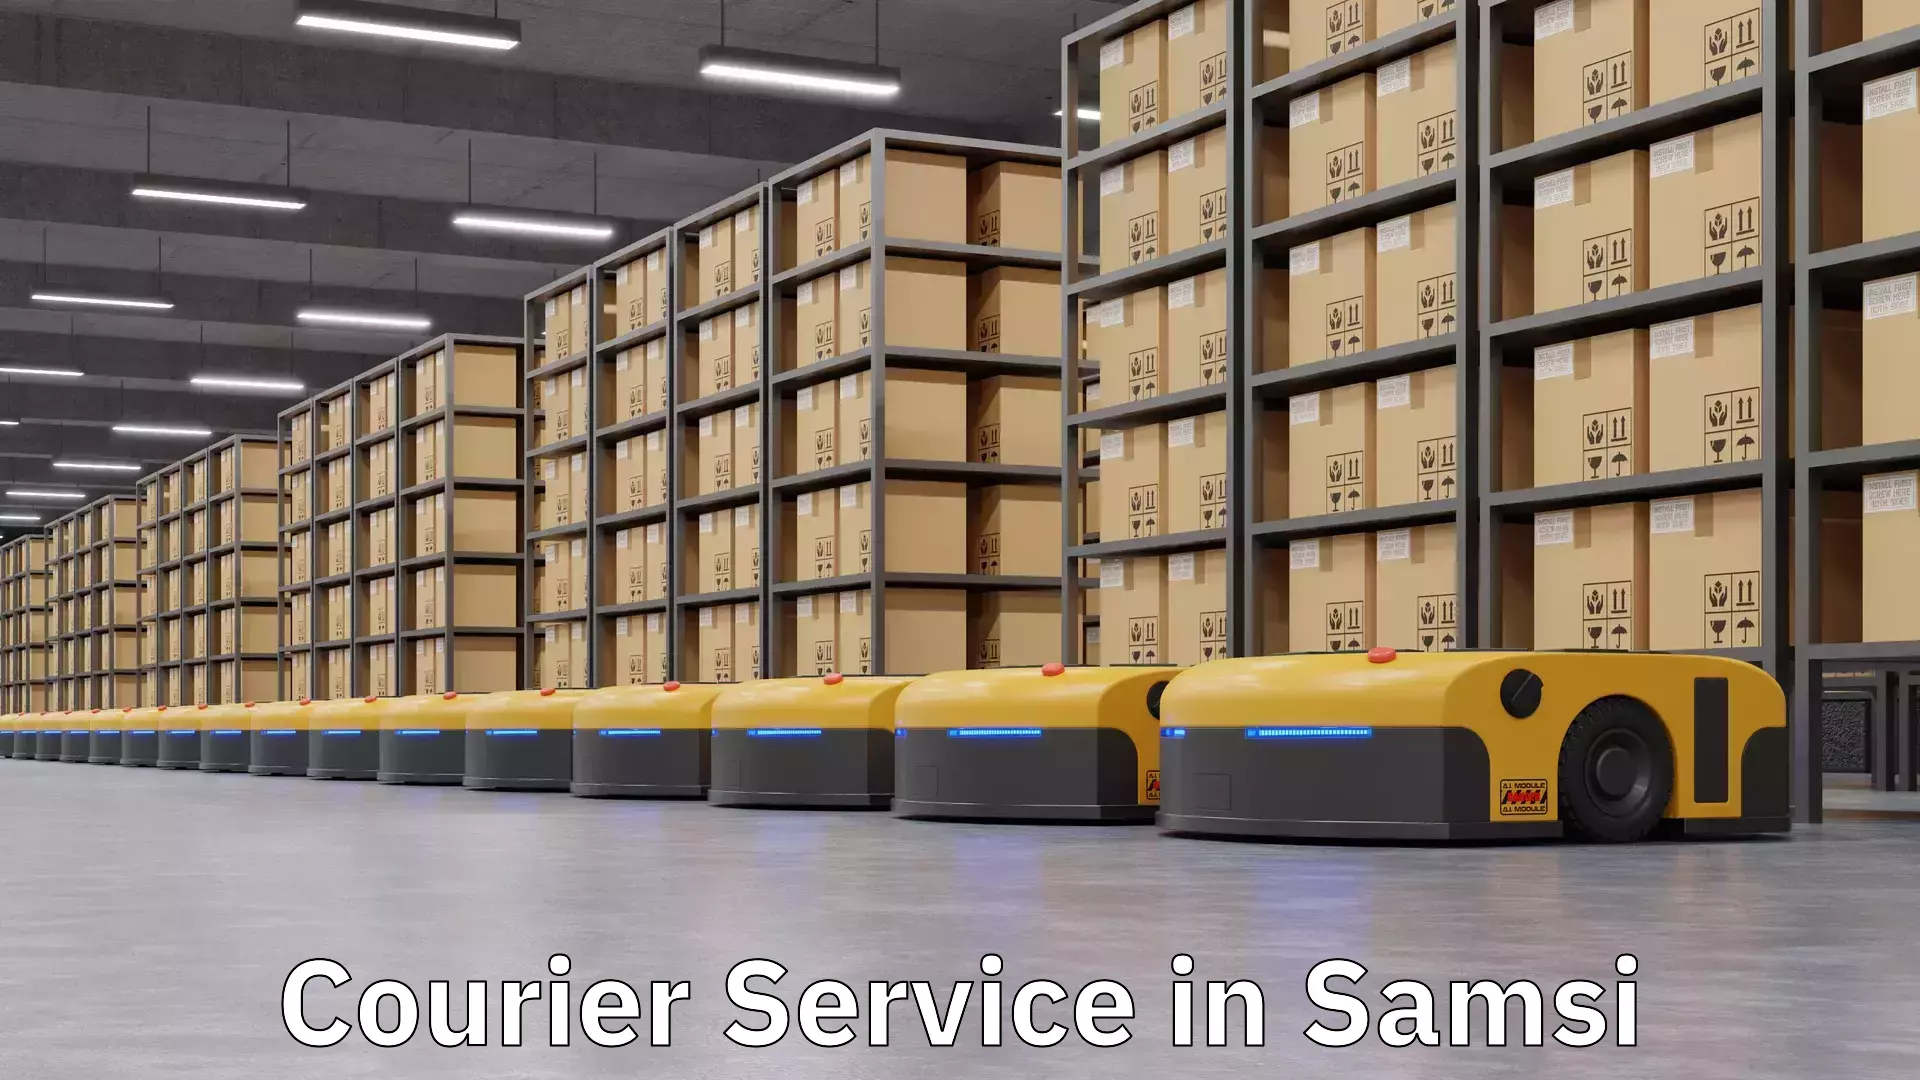 Diverse delivery methods in Samsi